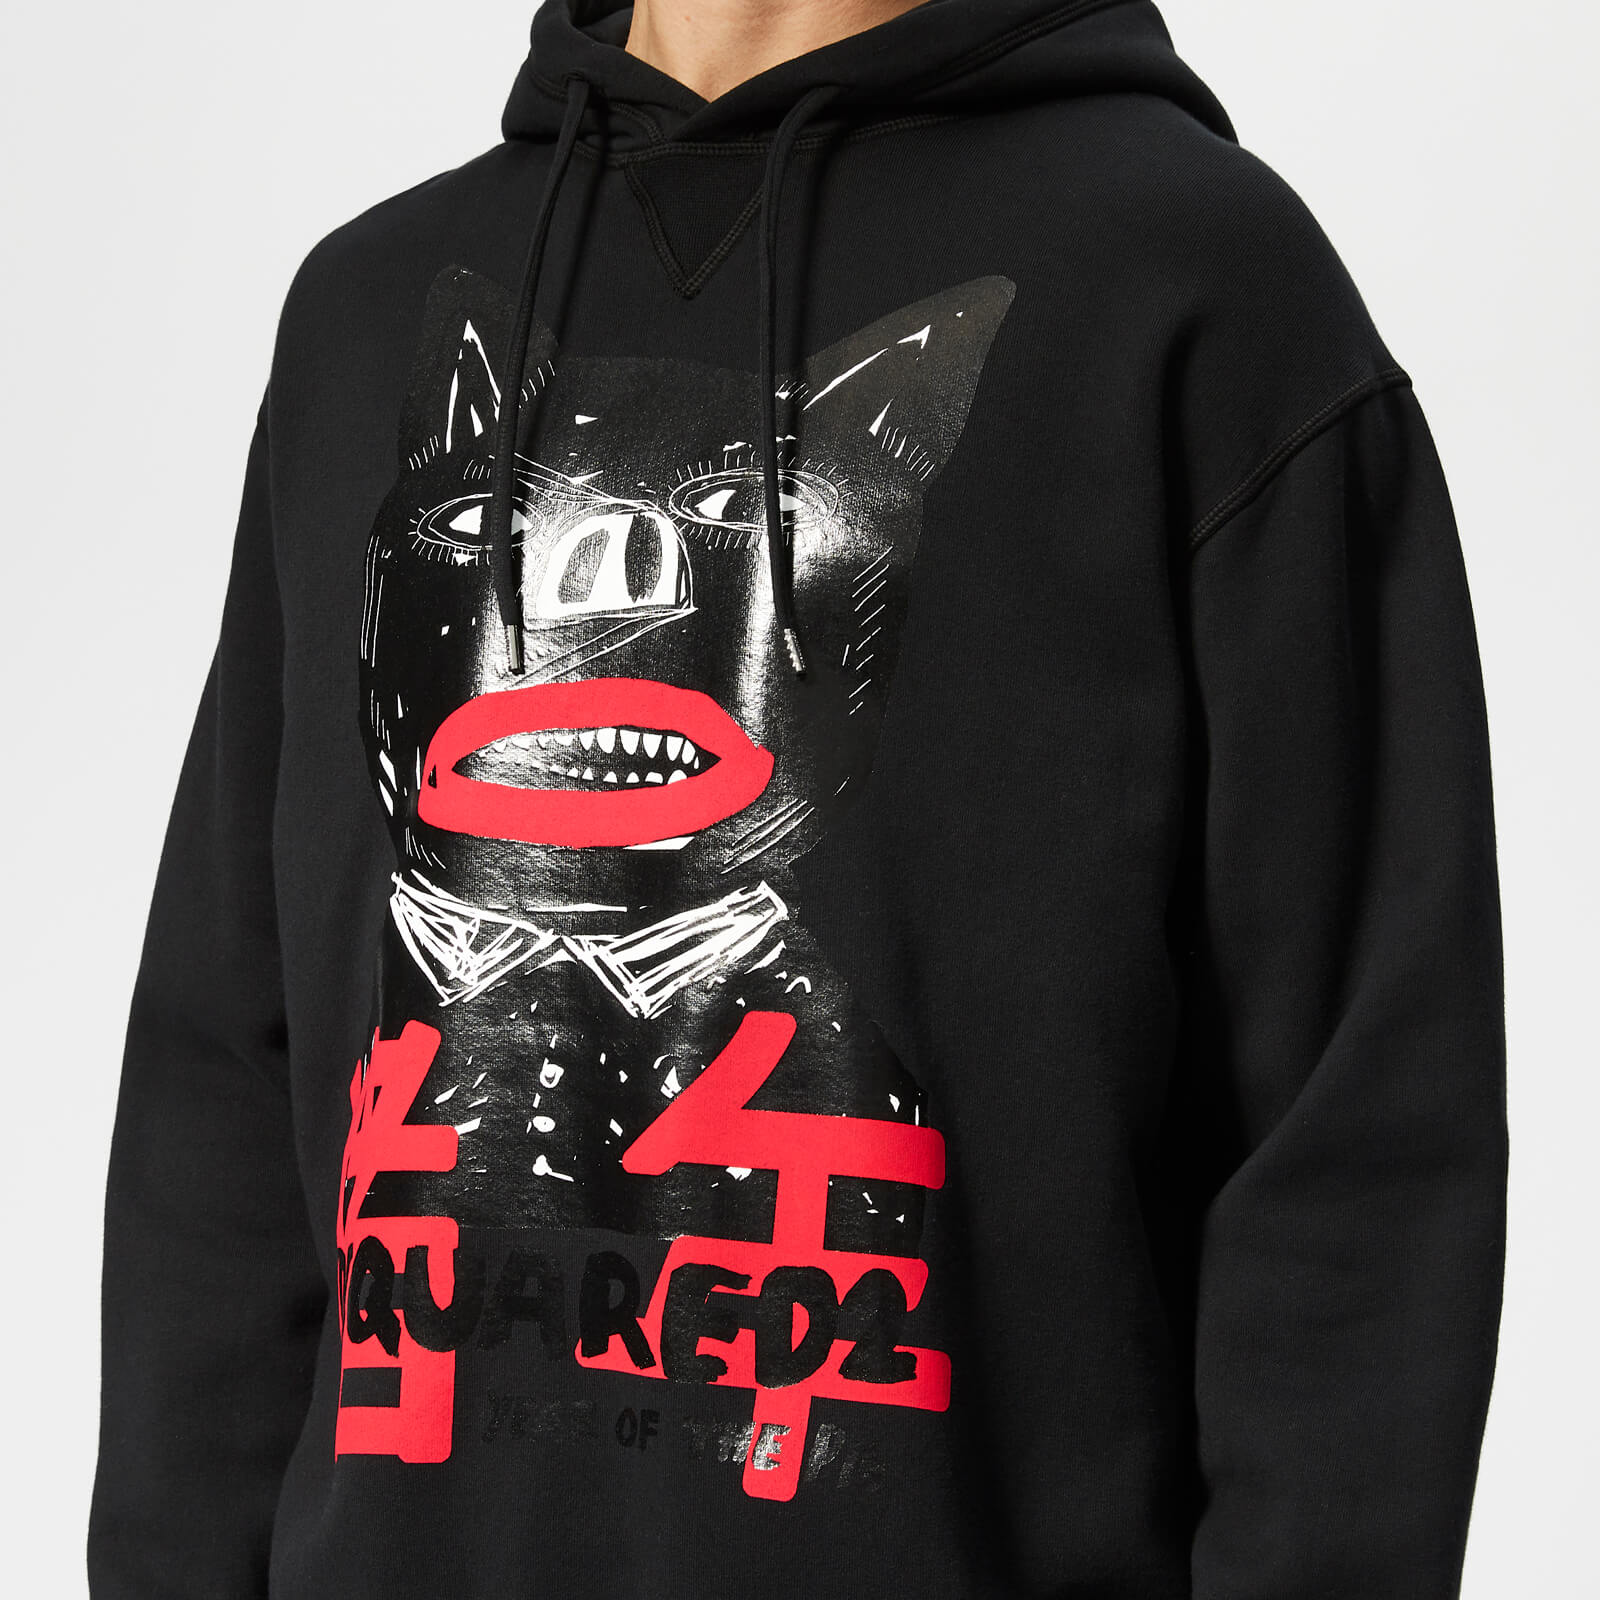 Dsquared2 Men's Year of the Pig Hoody - Black